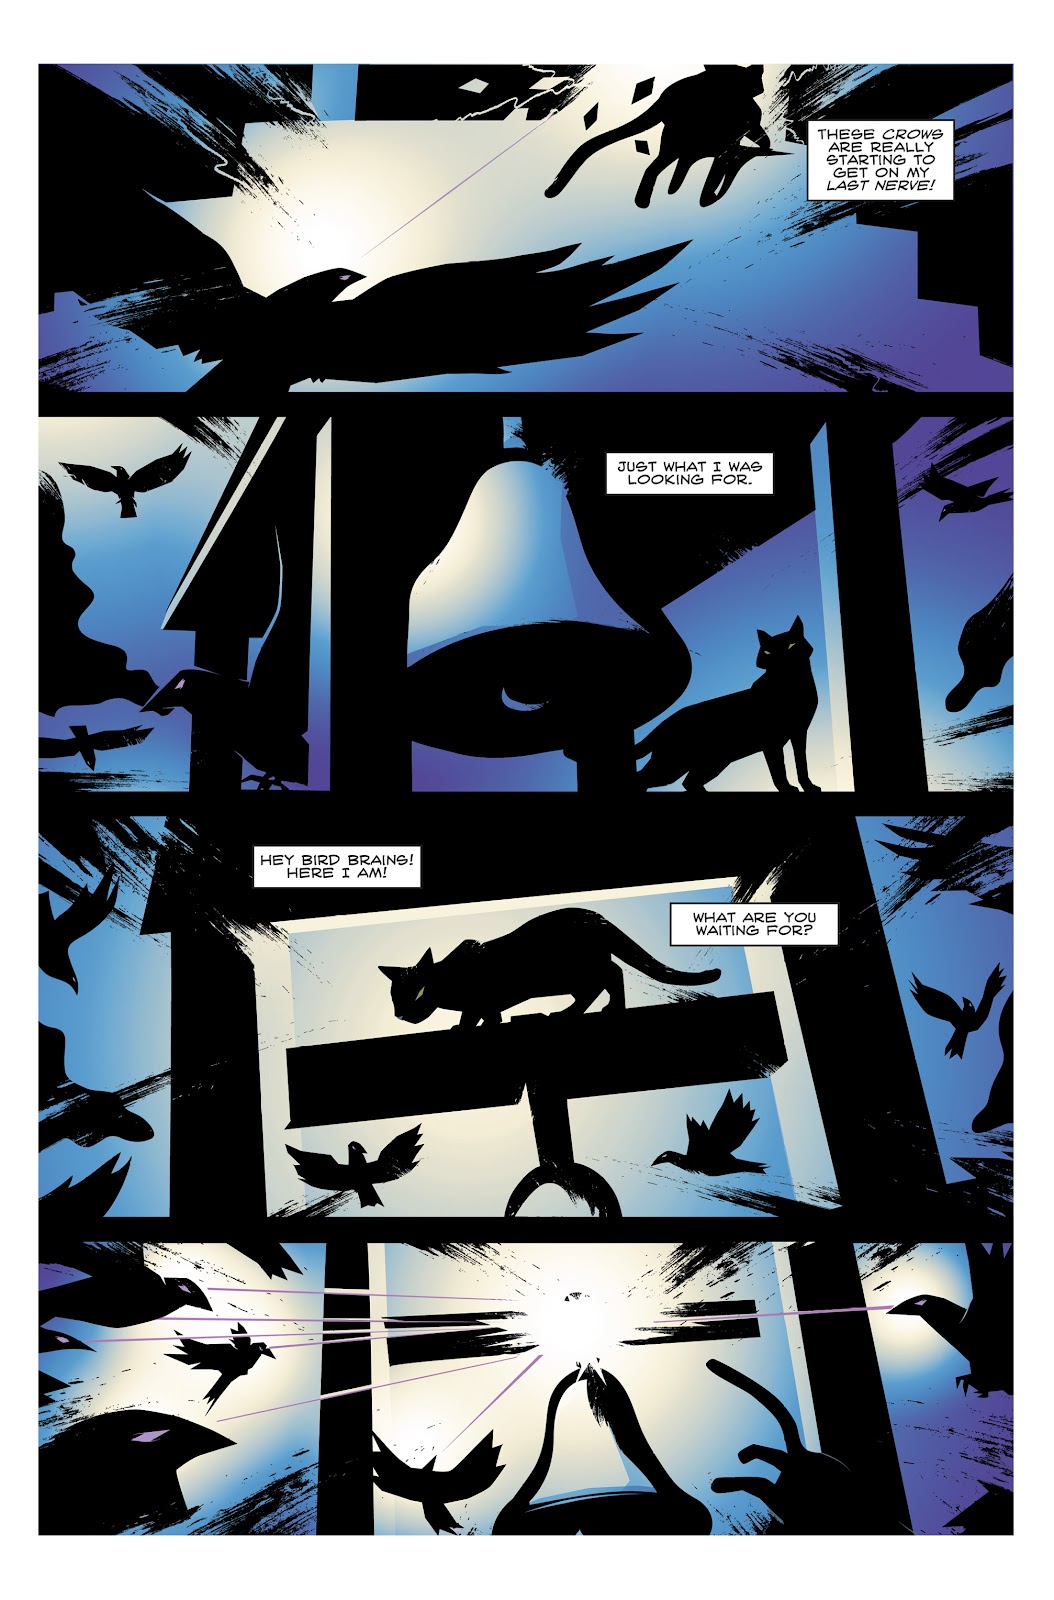 Hero Cats: Midnight Over Stellar City Vol. 2 issue 1 - Page 19